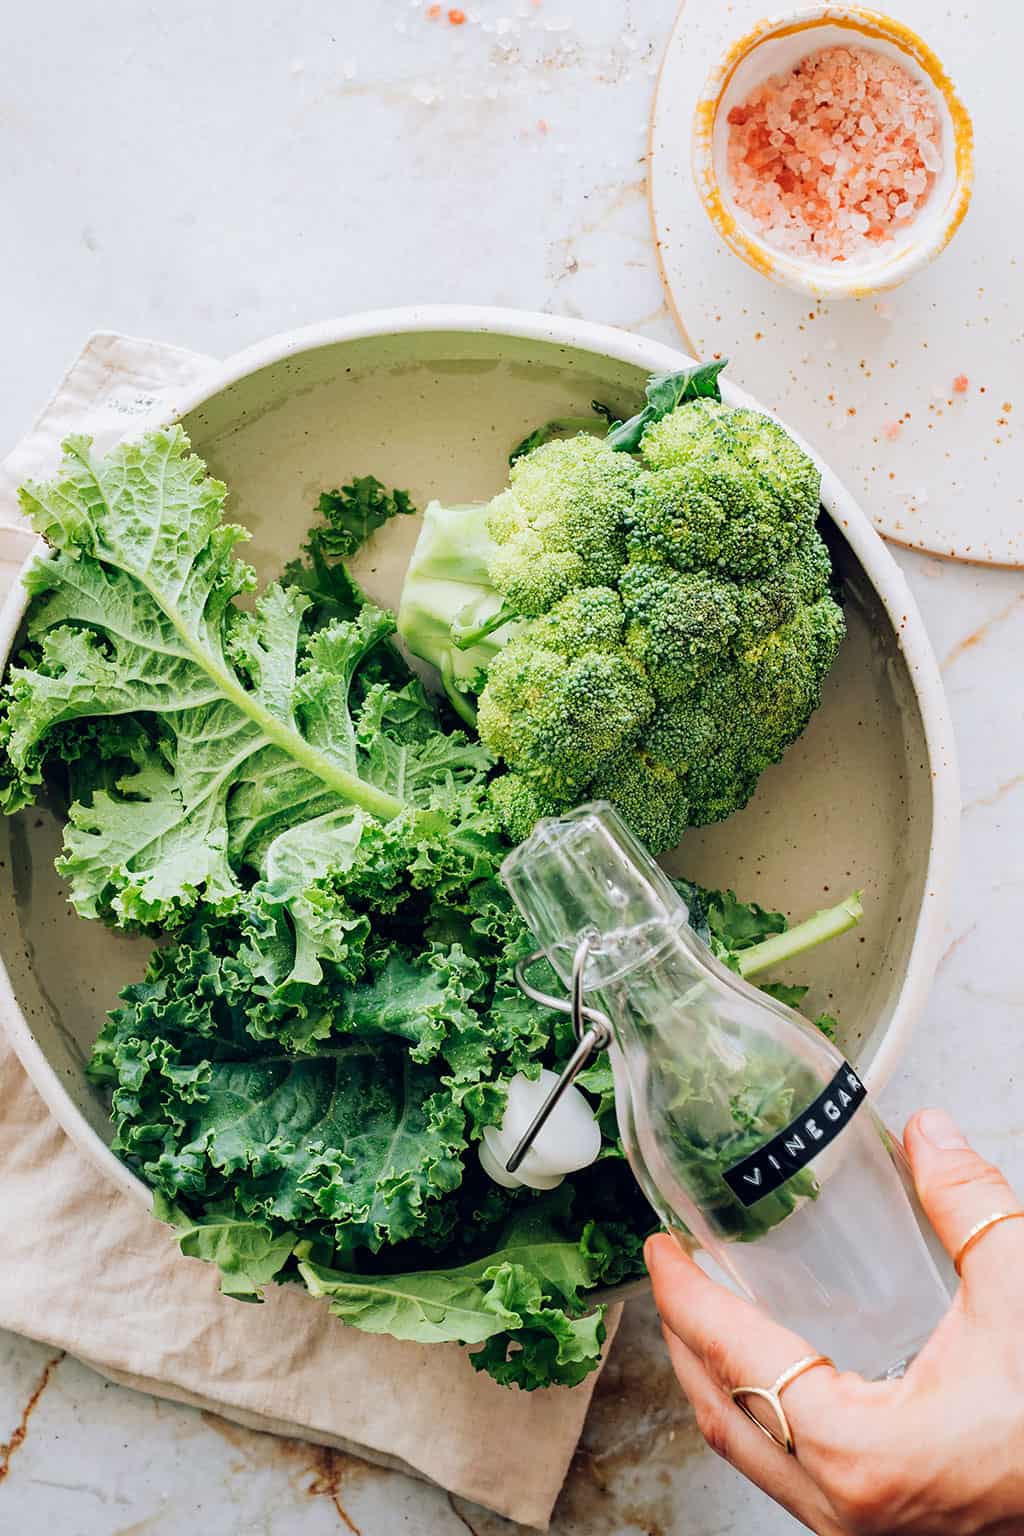 How to clean leafy greens with vinegar and salt soak